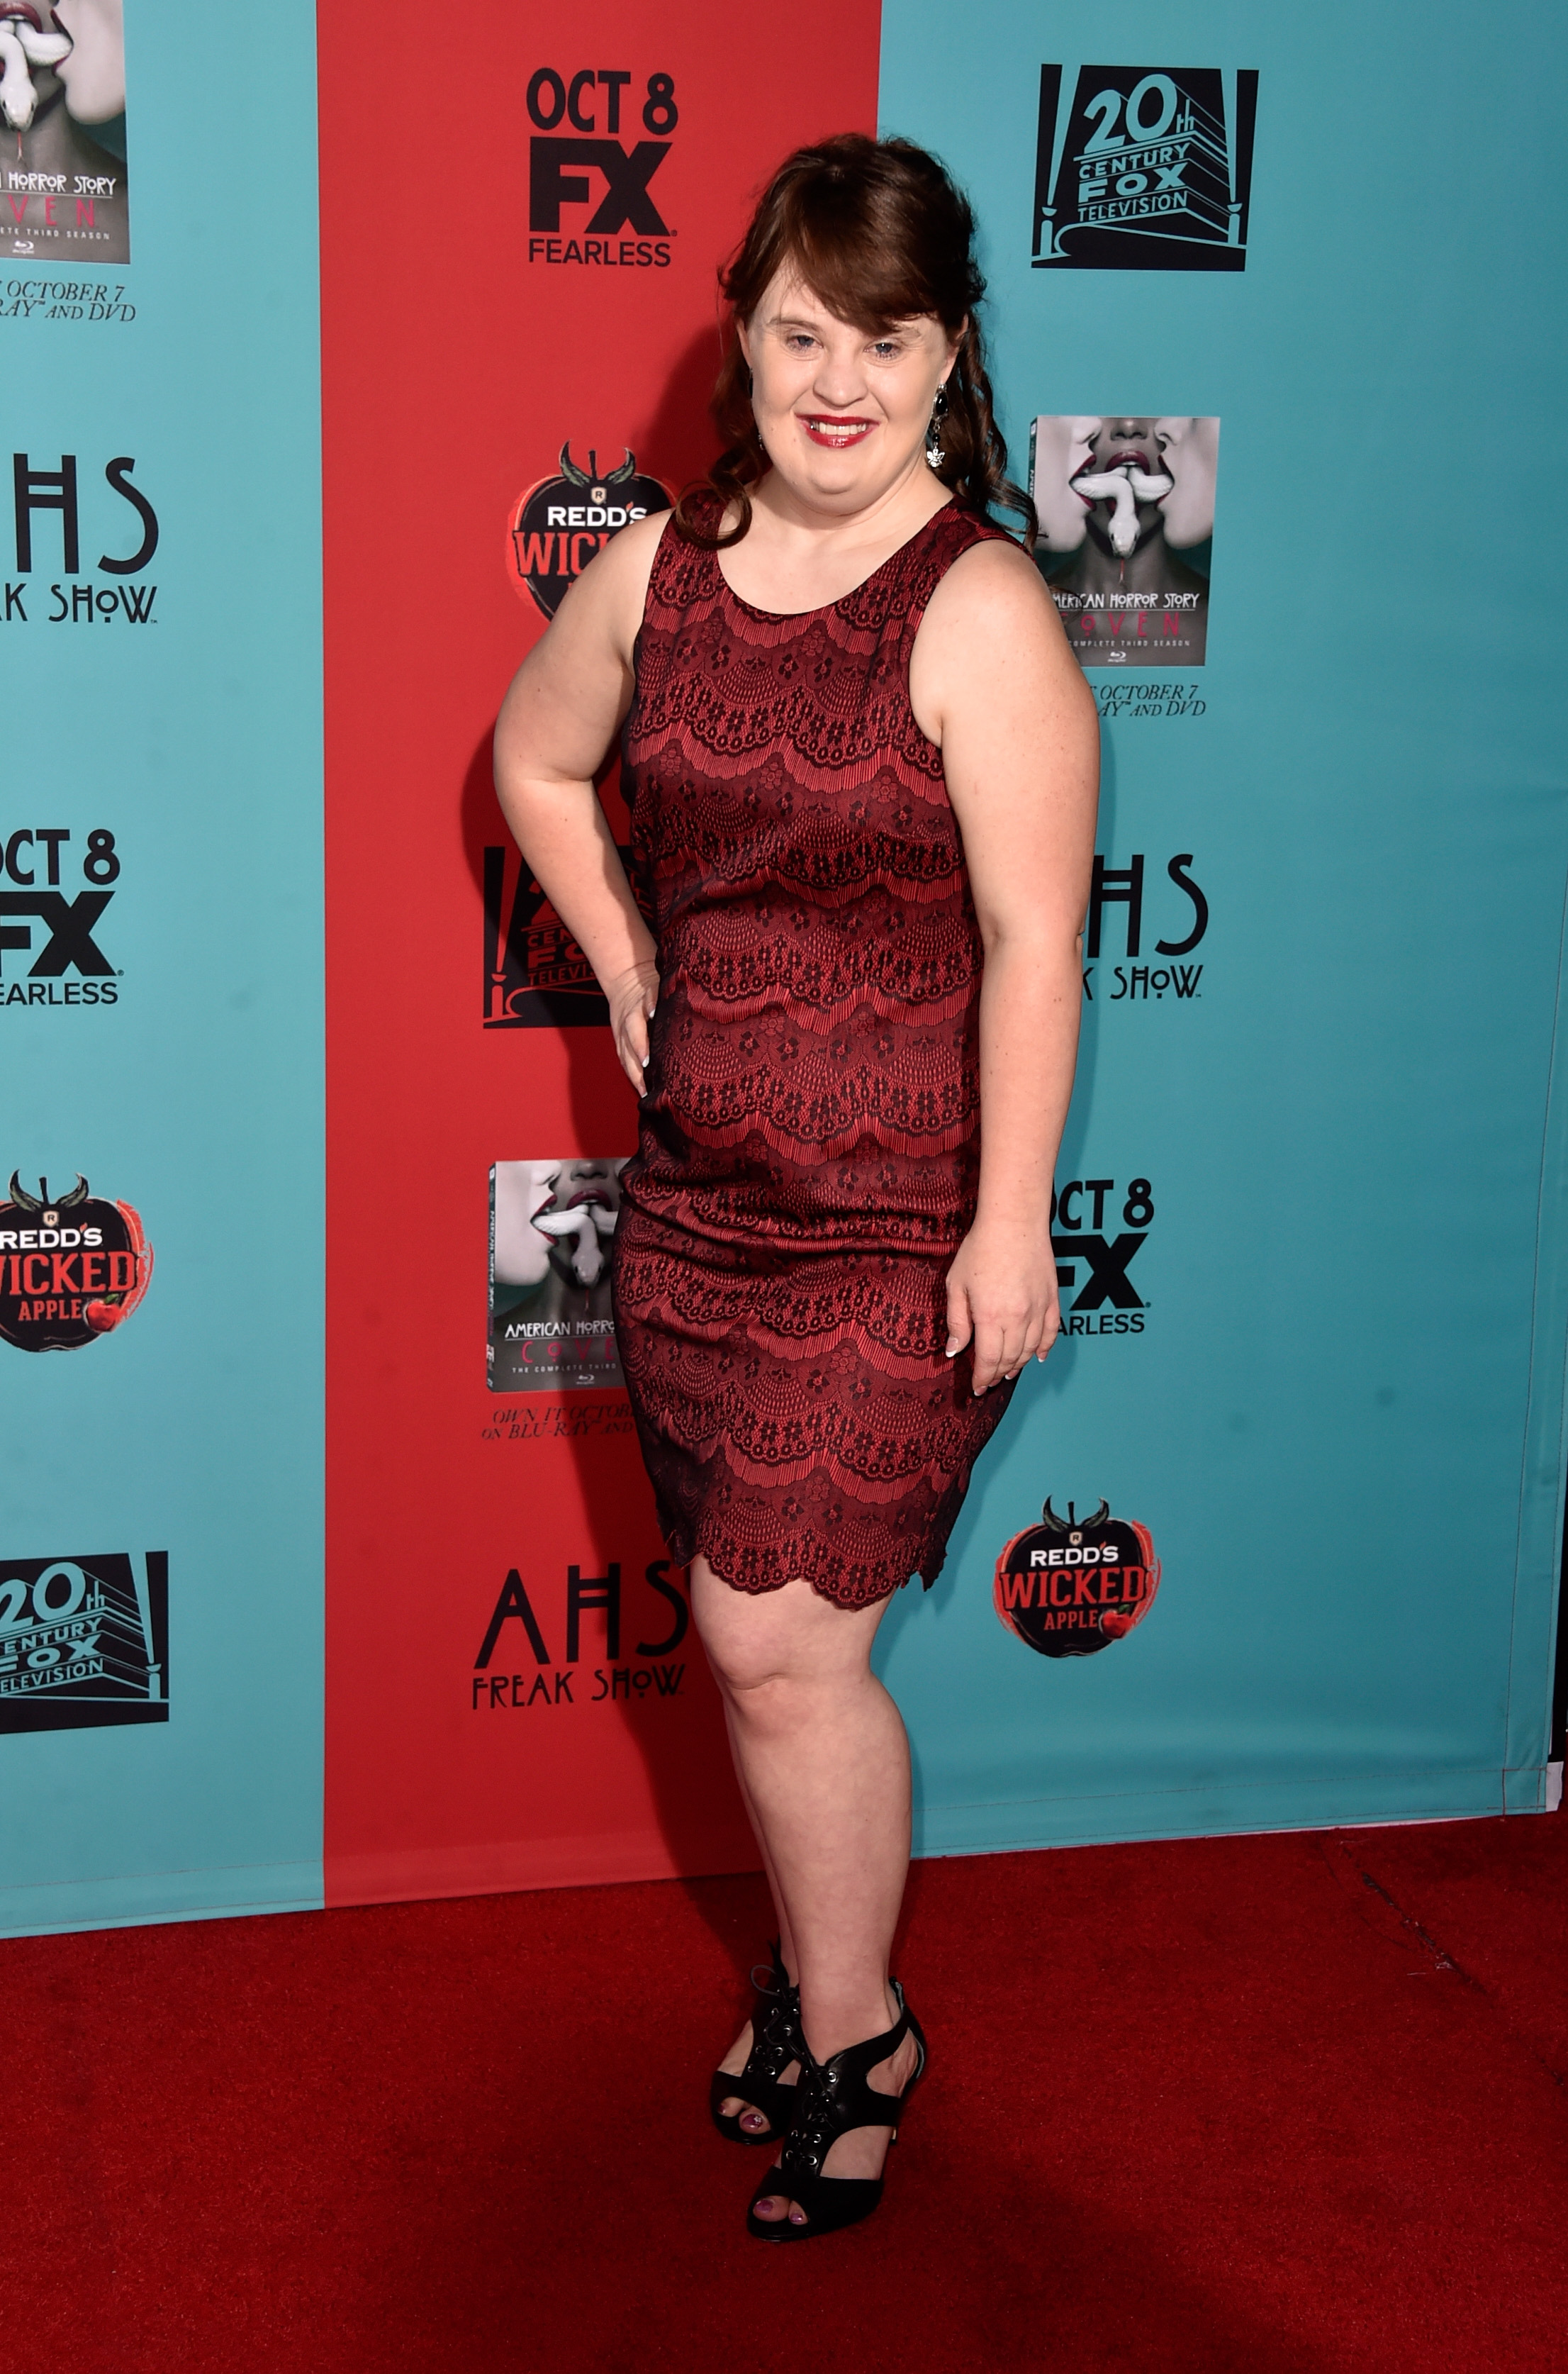 HOLLYWOOD, CA - OCTOBER 05: Actress Jamie Brewer attends FX's 'American Horror Story: Freak Show' premiere screening at TCL Chinese Theatre on October 5, 2014 in Hollywood, California